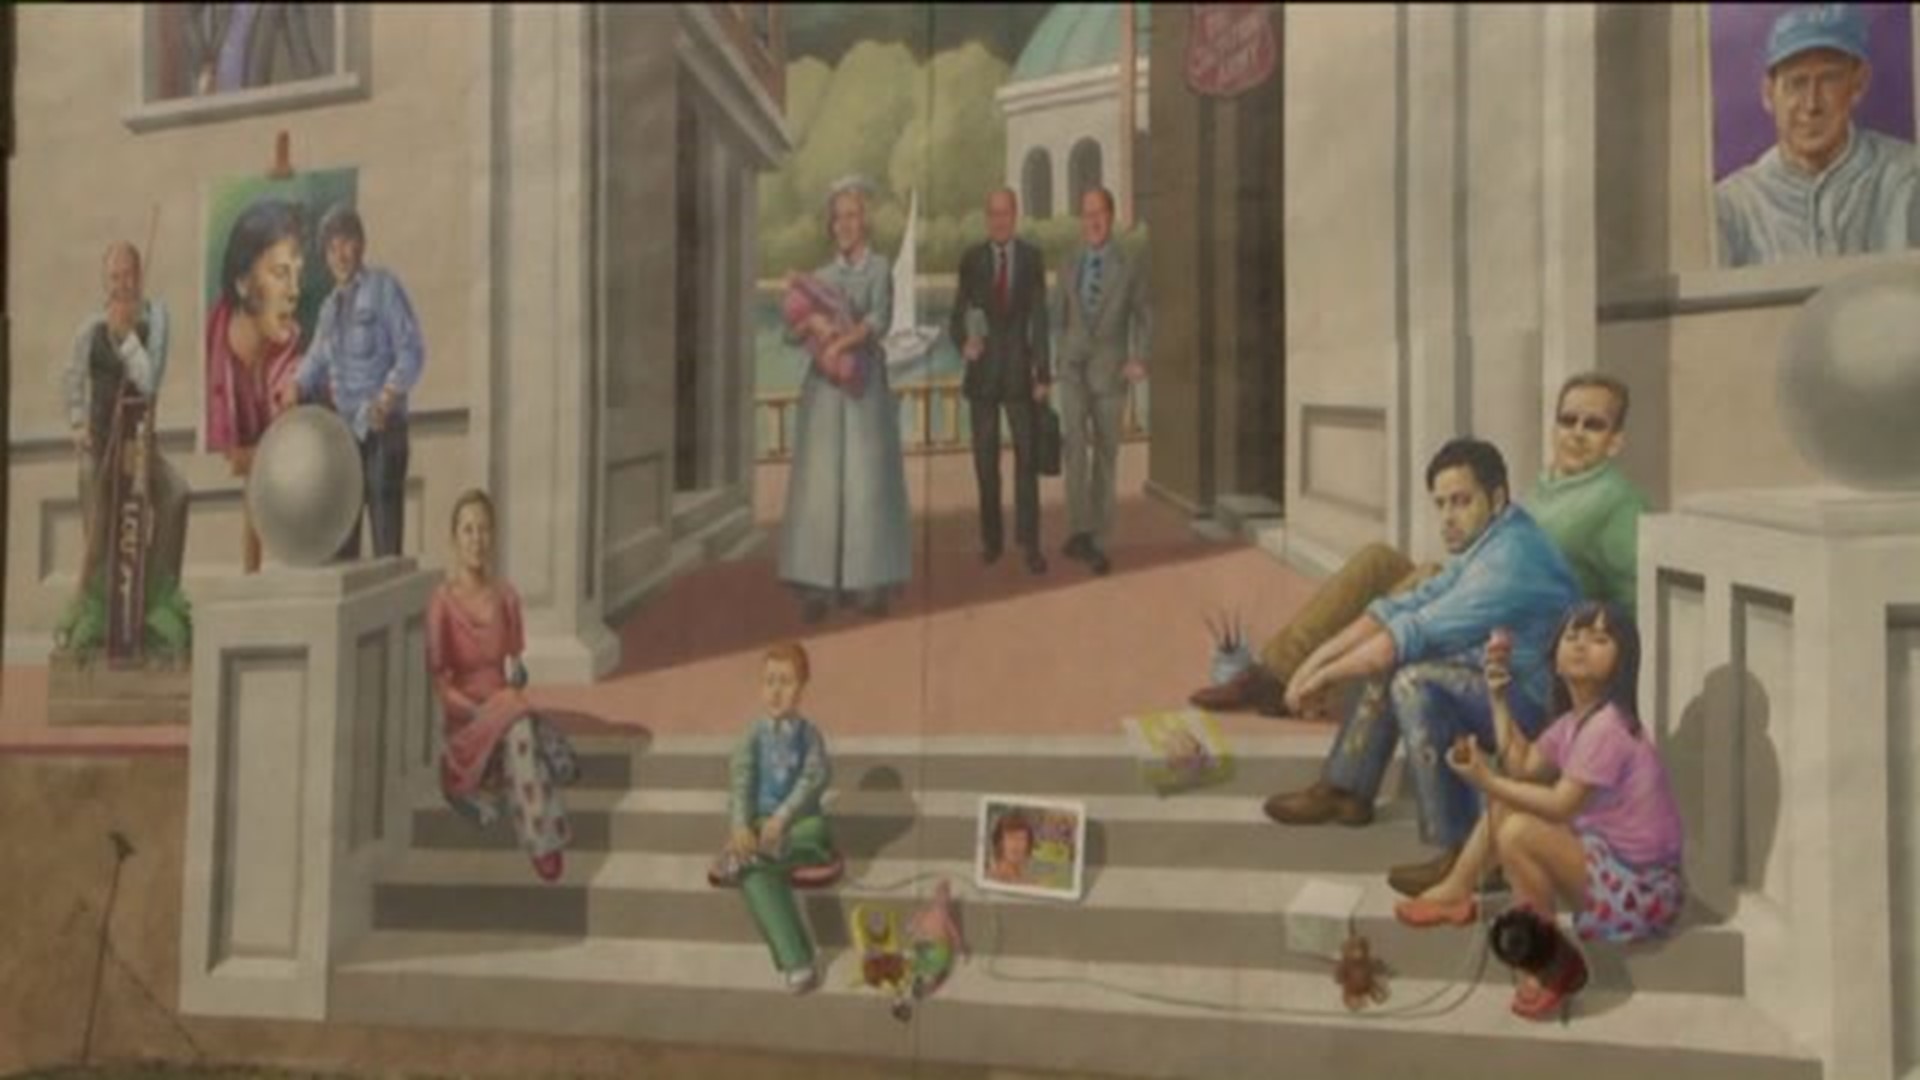 Mural Featuring Pittston History Finally on Display